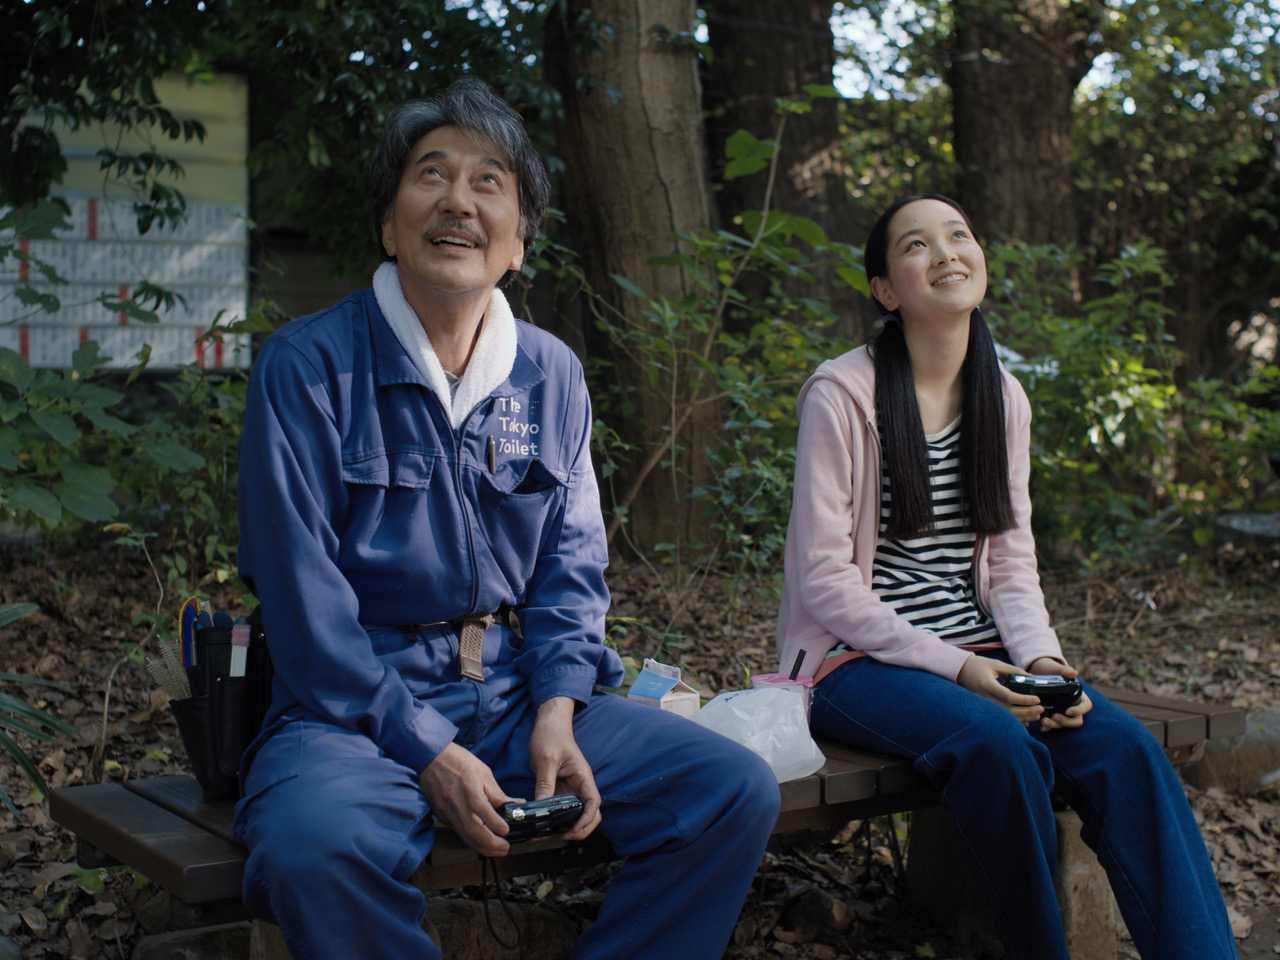 An old man and a young woman are seated, happily looking at the sky.